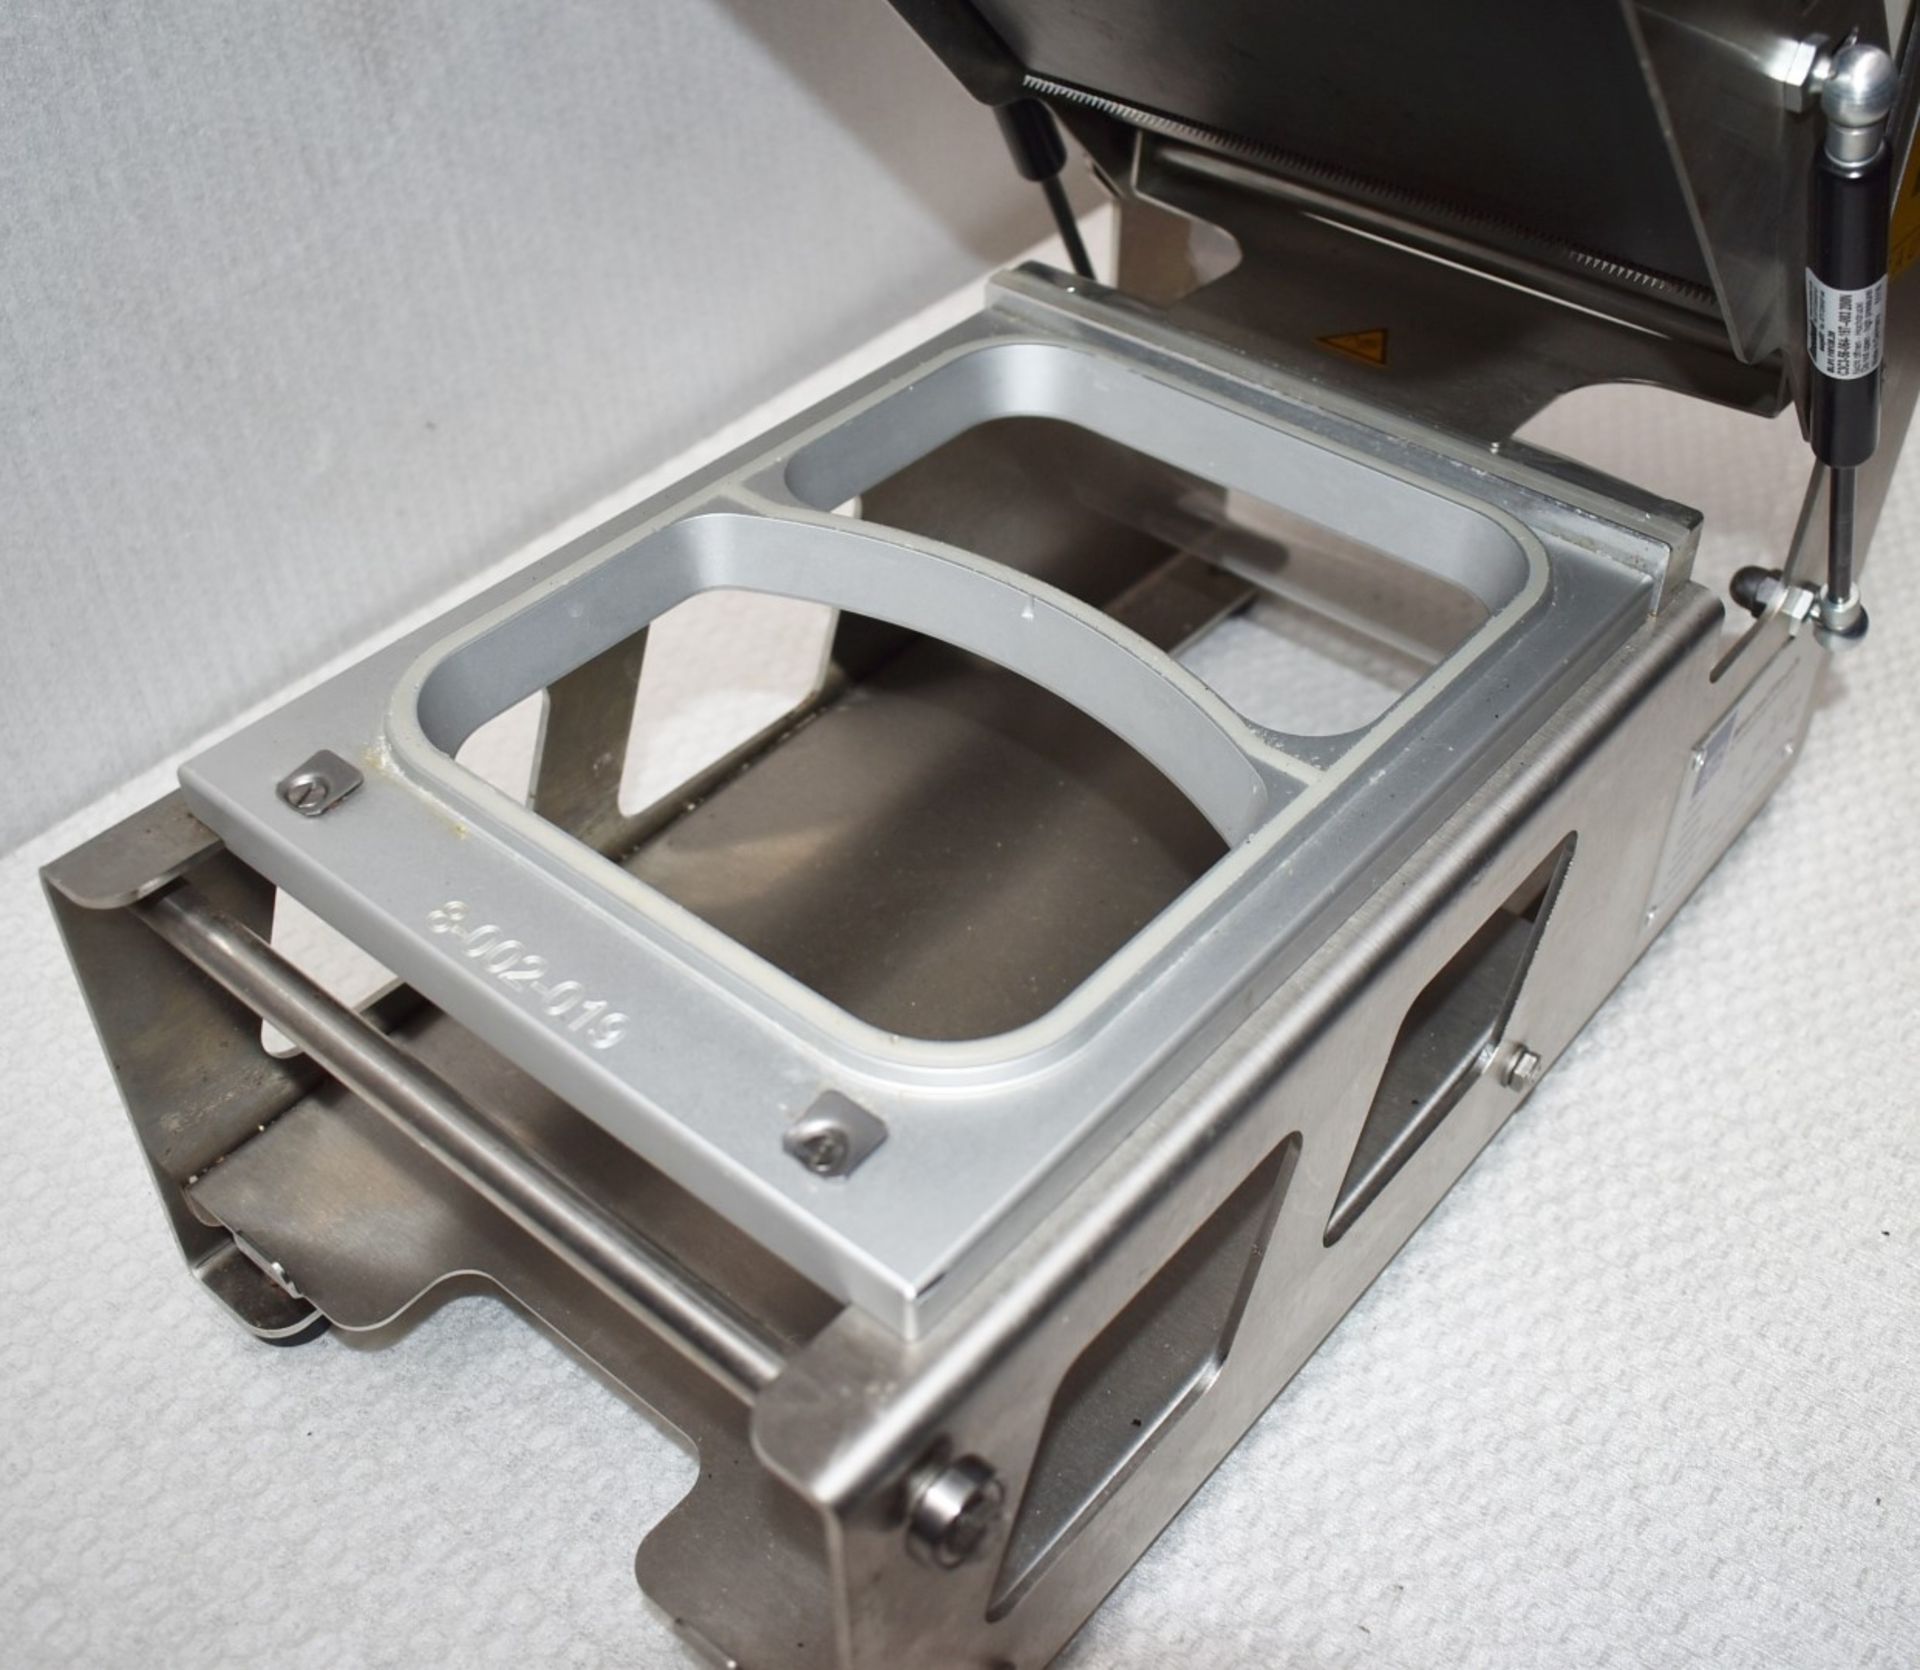 1 x Metal Tech Manual Food Tray Sealing Machine - Type 190 - 2018 Model - 240v - Recently Removed - Image 7 of 7